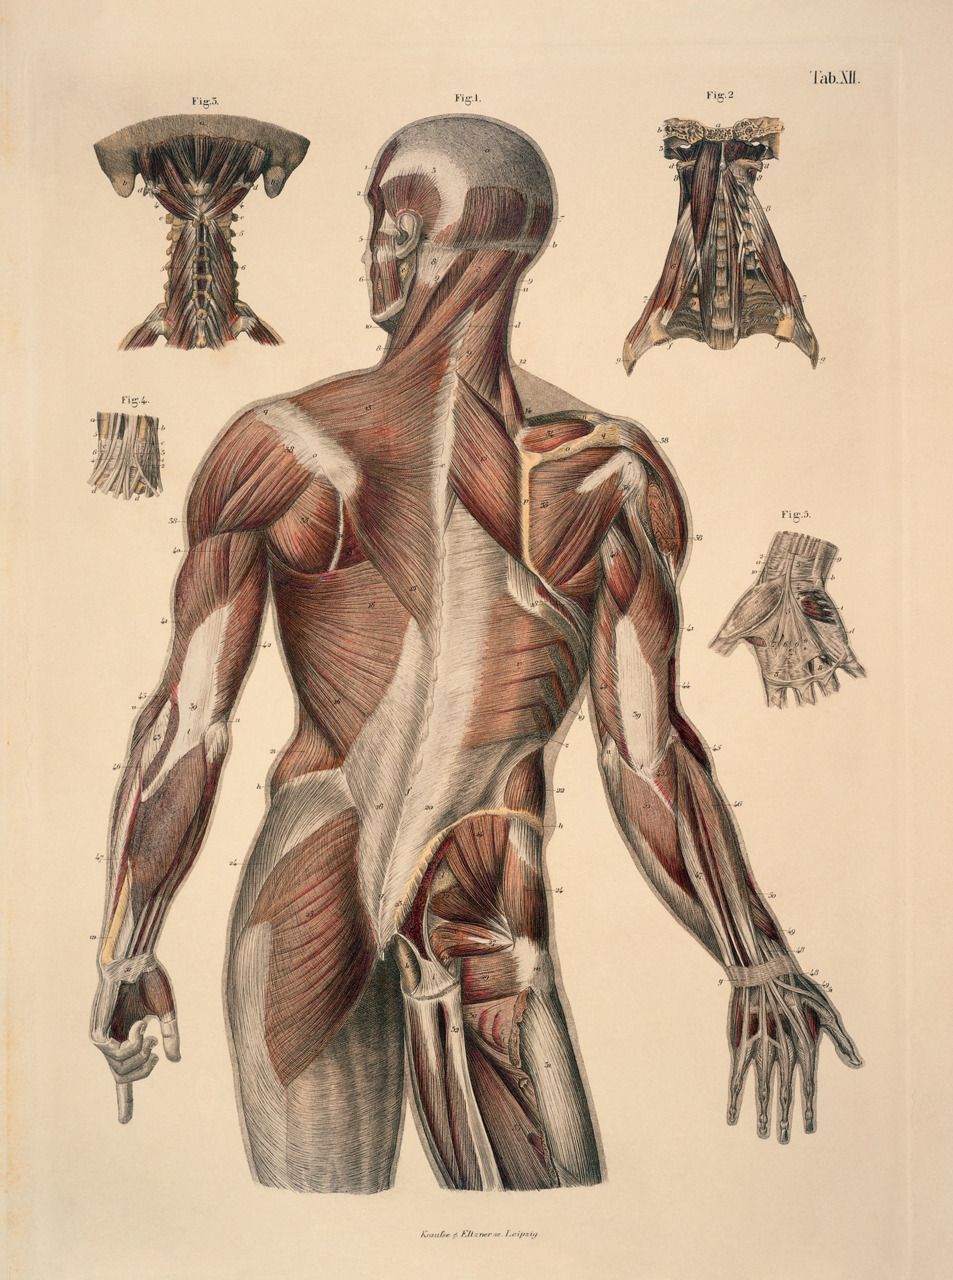 An antique print of a human back with muscles highlighted in red. - Anatomy